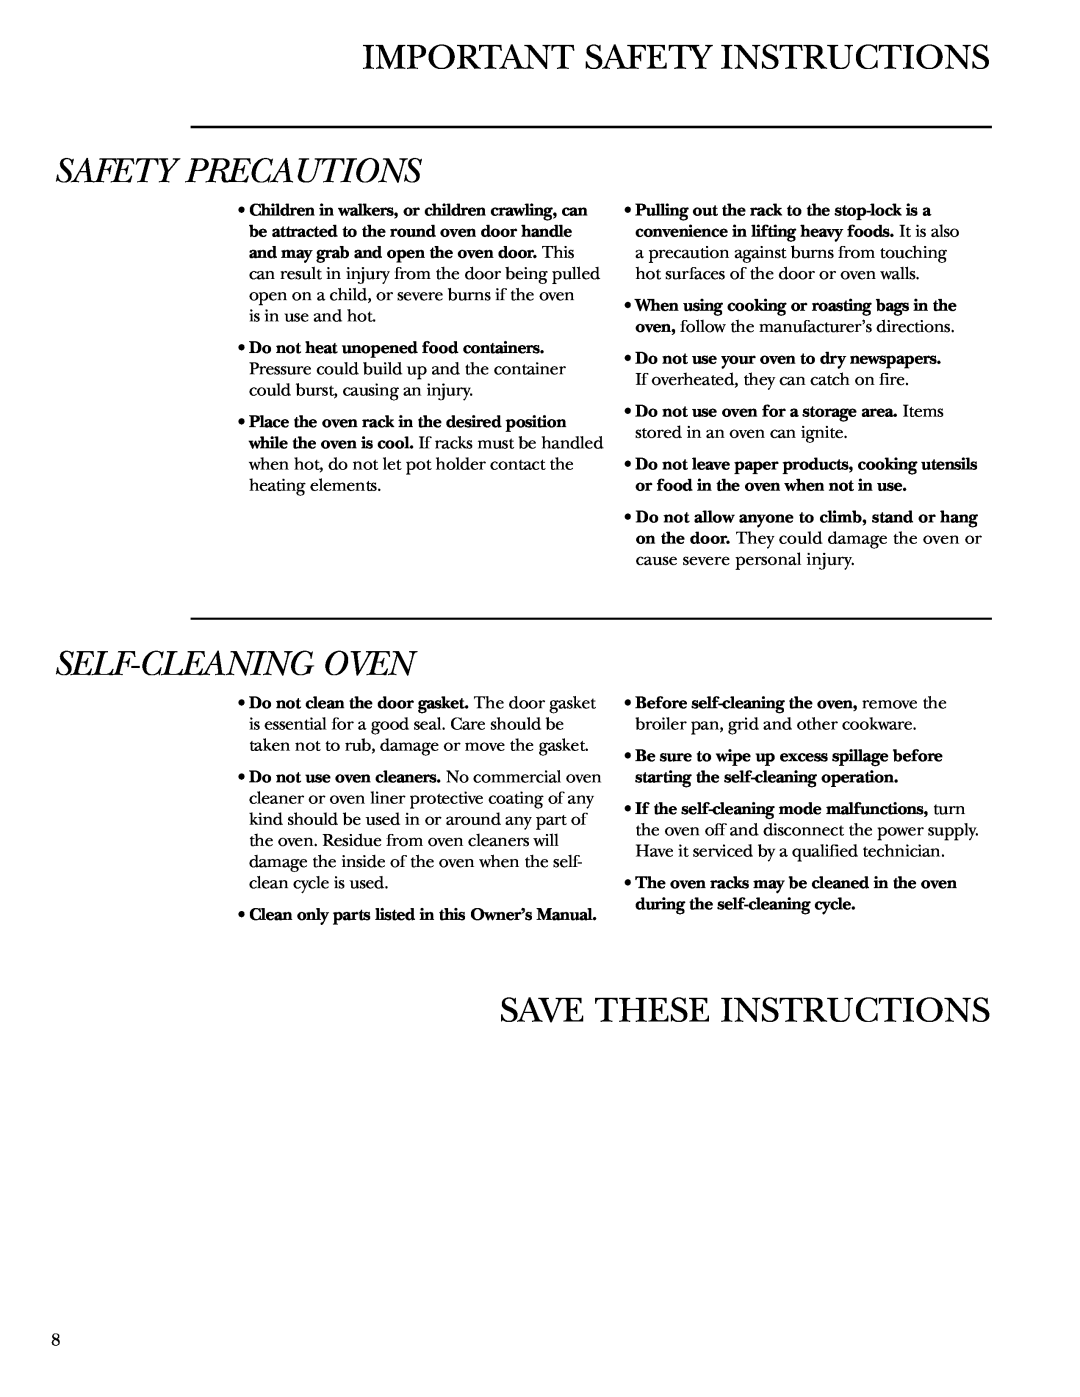 GE Monogram ZET1058 Self-Cleaning Oven, Save These Instructions, Important Safety Instructions, Safety Precautions 